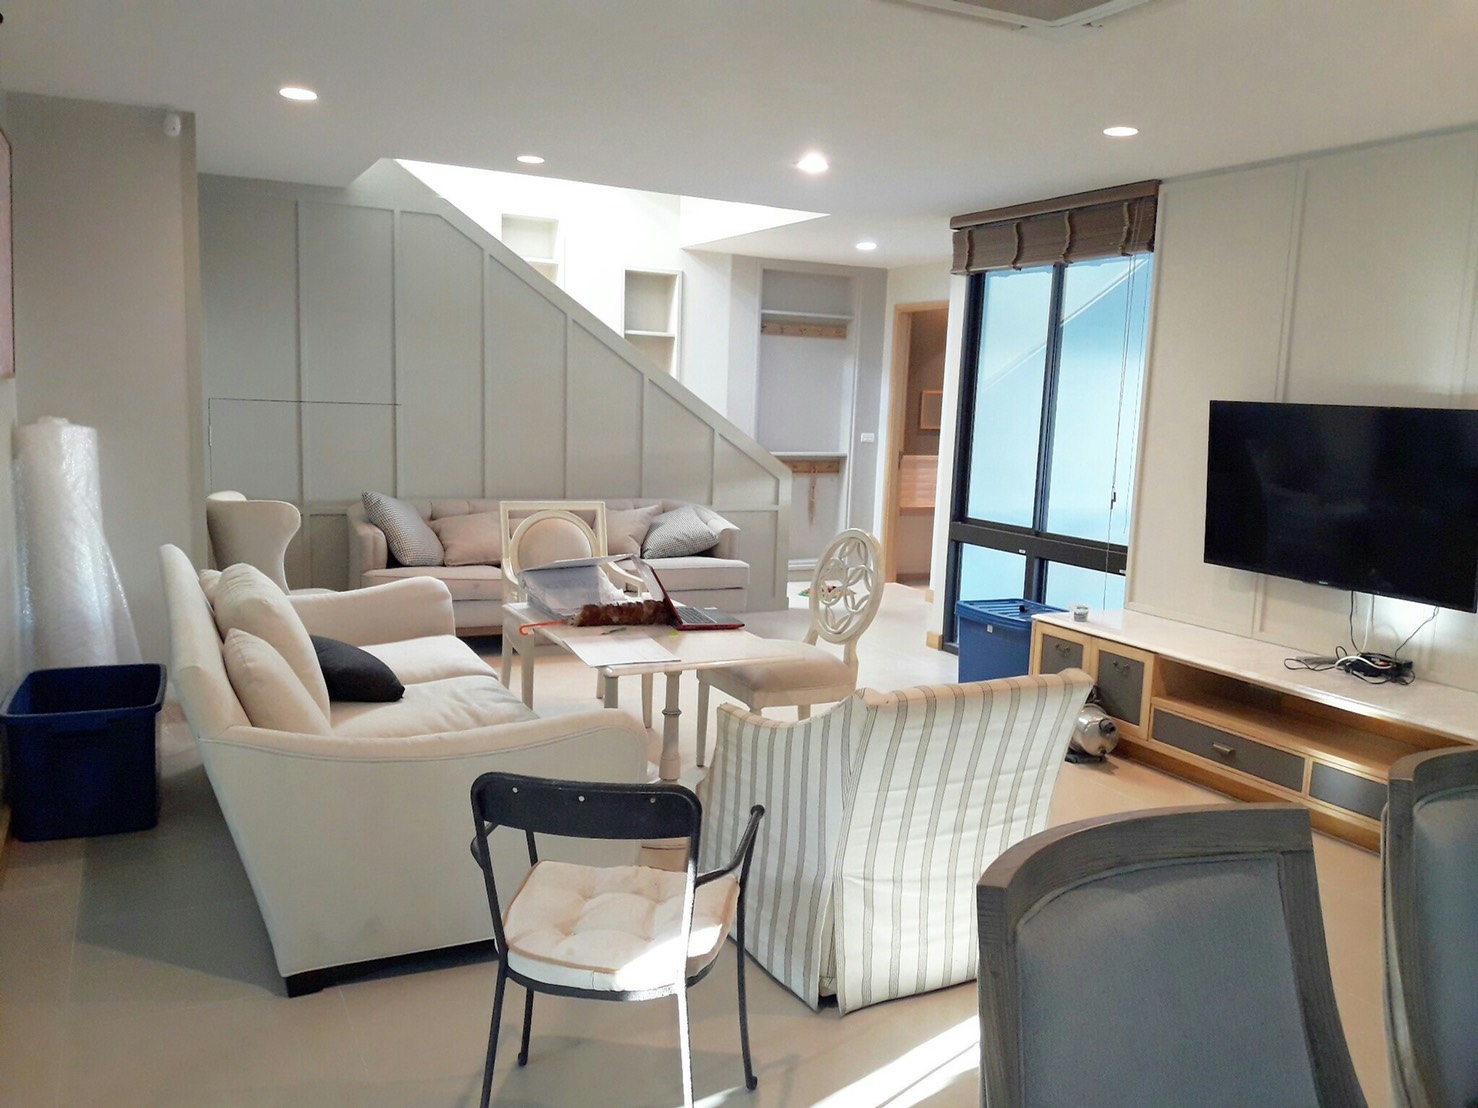 – For SELL – I-NINE Phaholyothin HOUSE***Special Price 29,900,000 Baht***